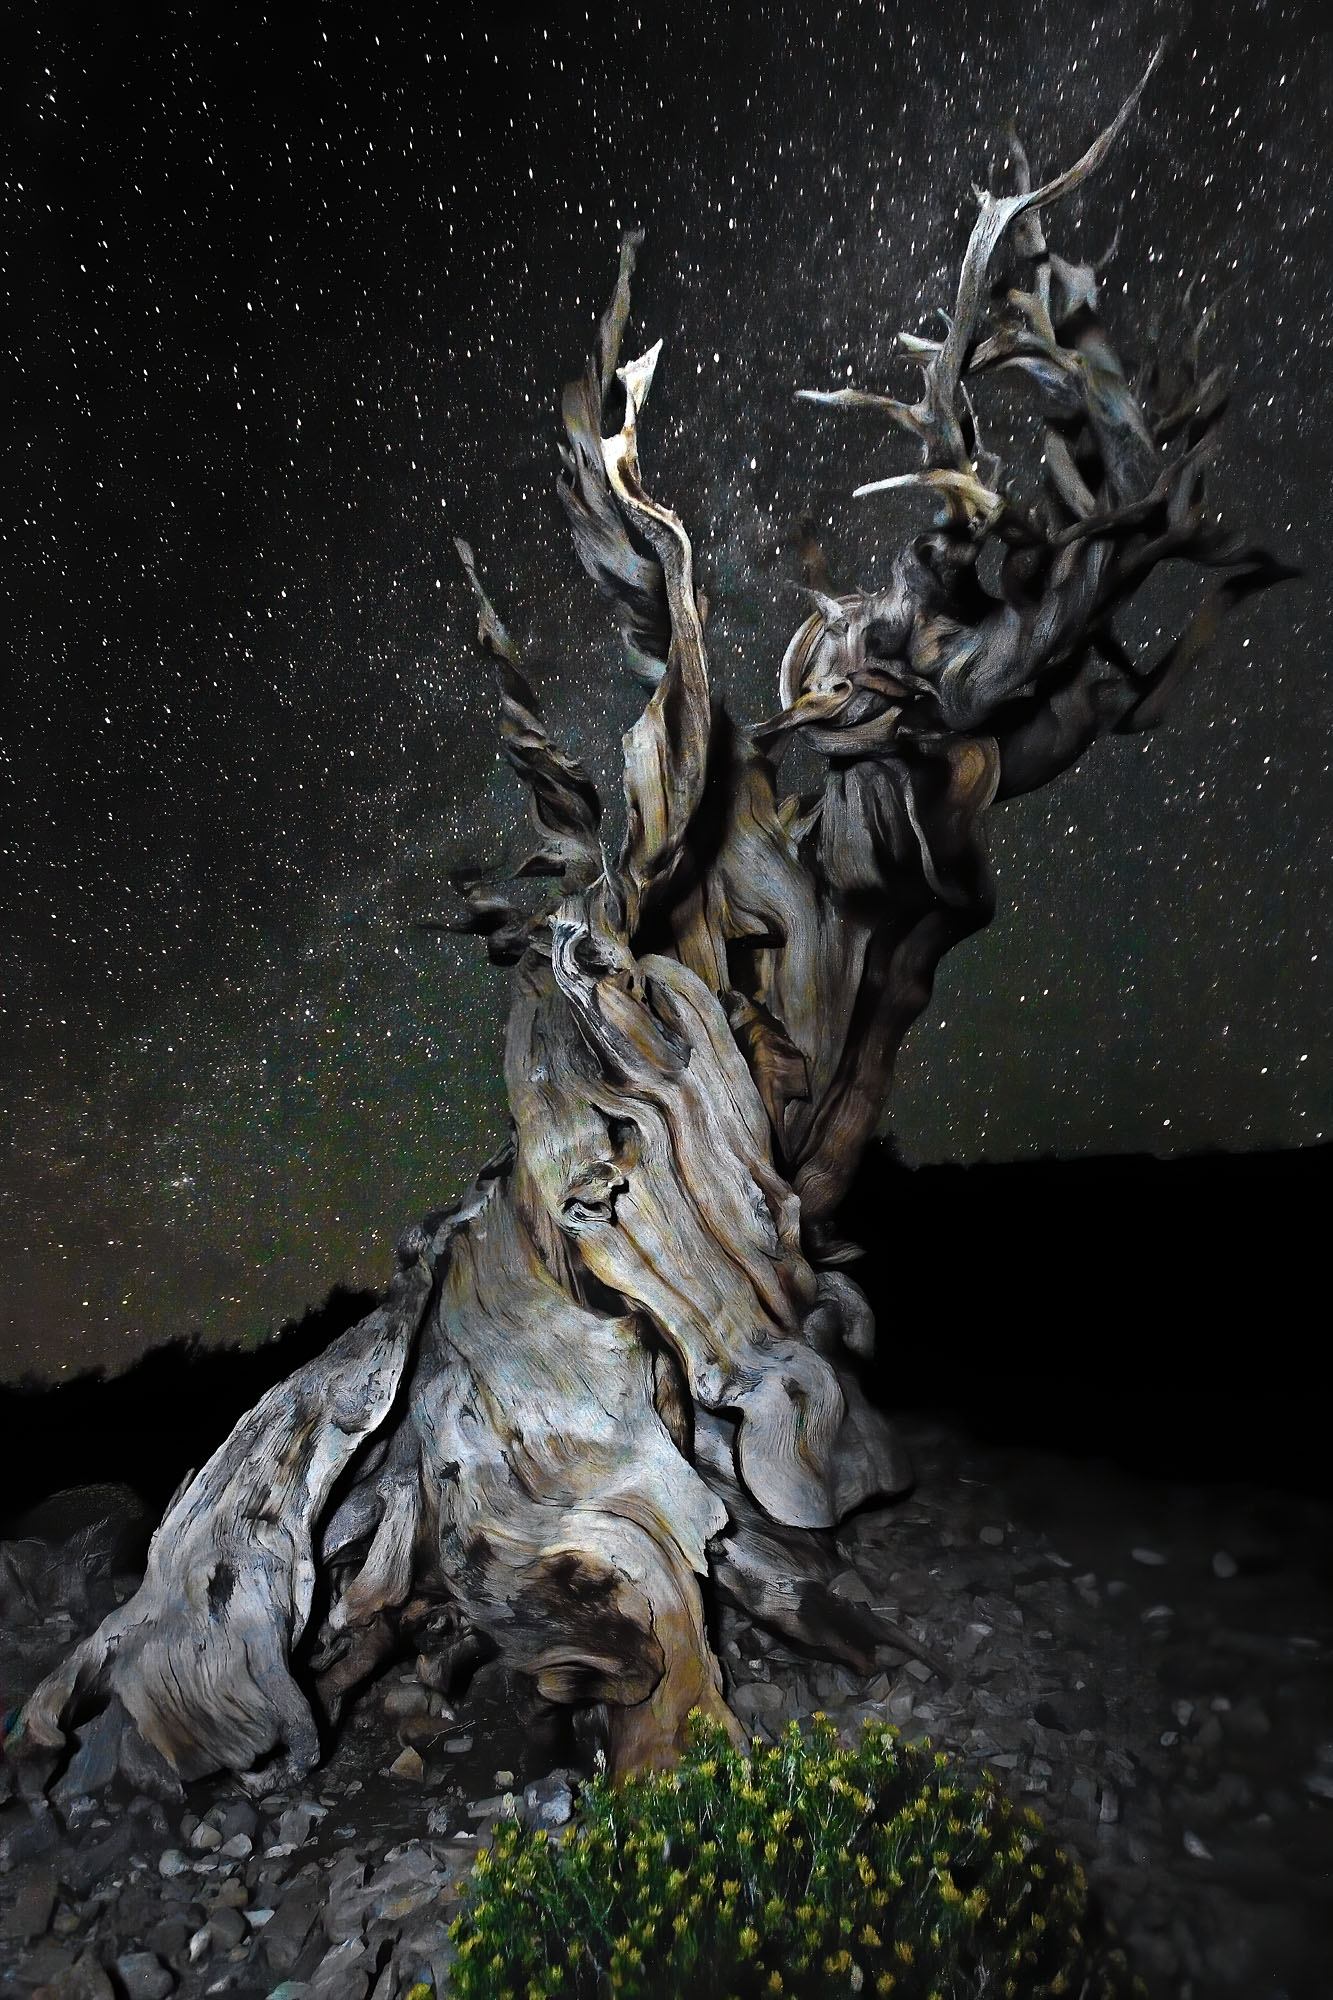 A bristlecone pine in the White Mountains of California under the stars of the Milky Way